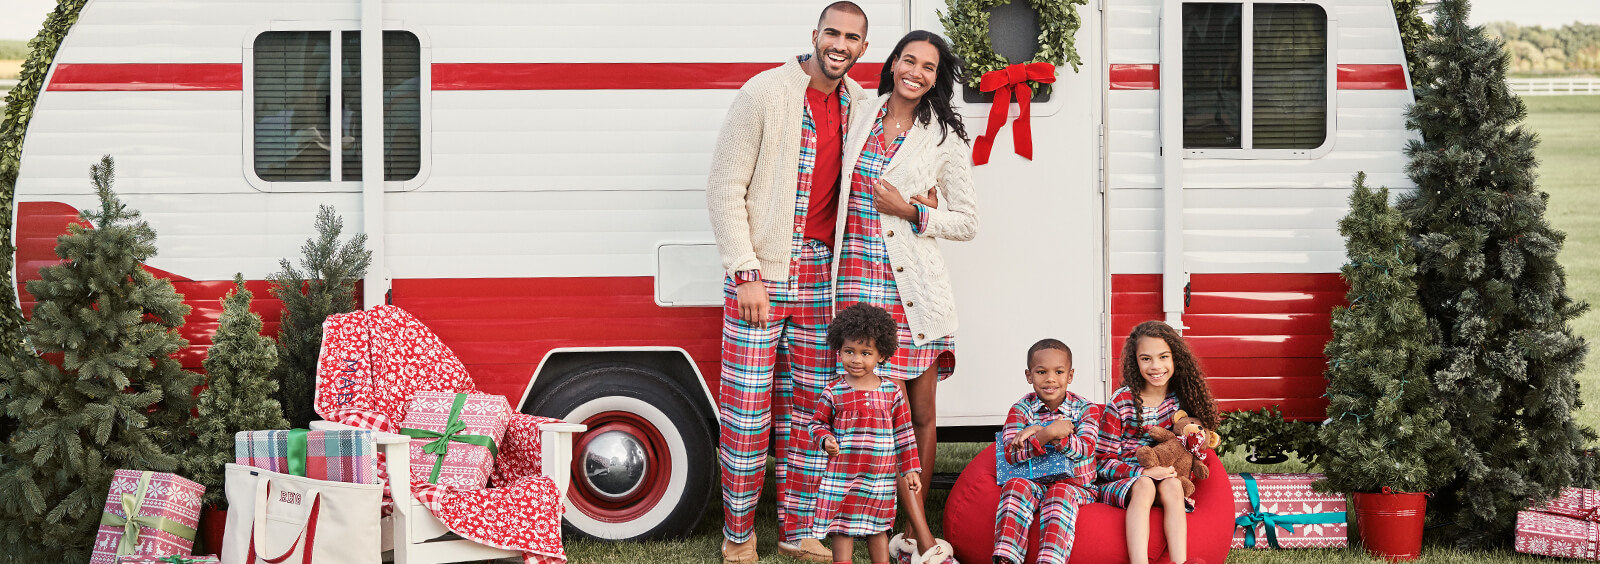 How to Pick the Perfect PJs For Everyone on Your Christmas List